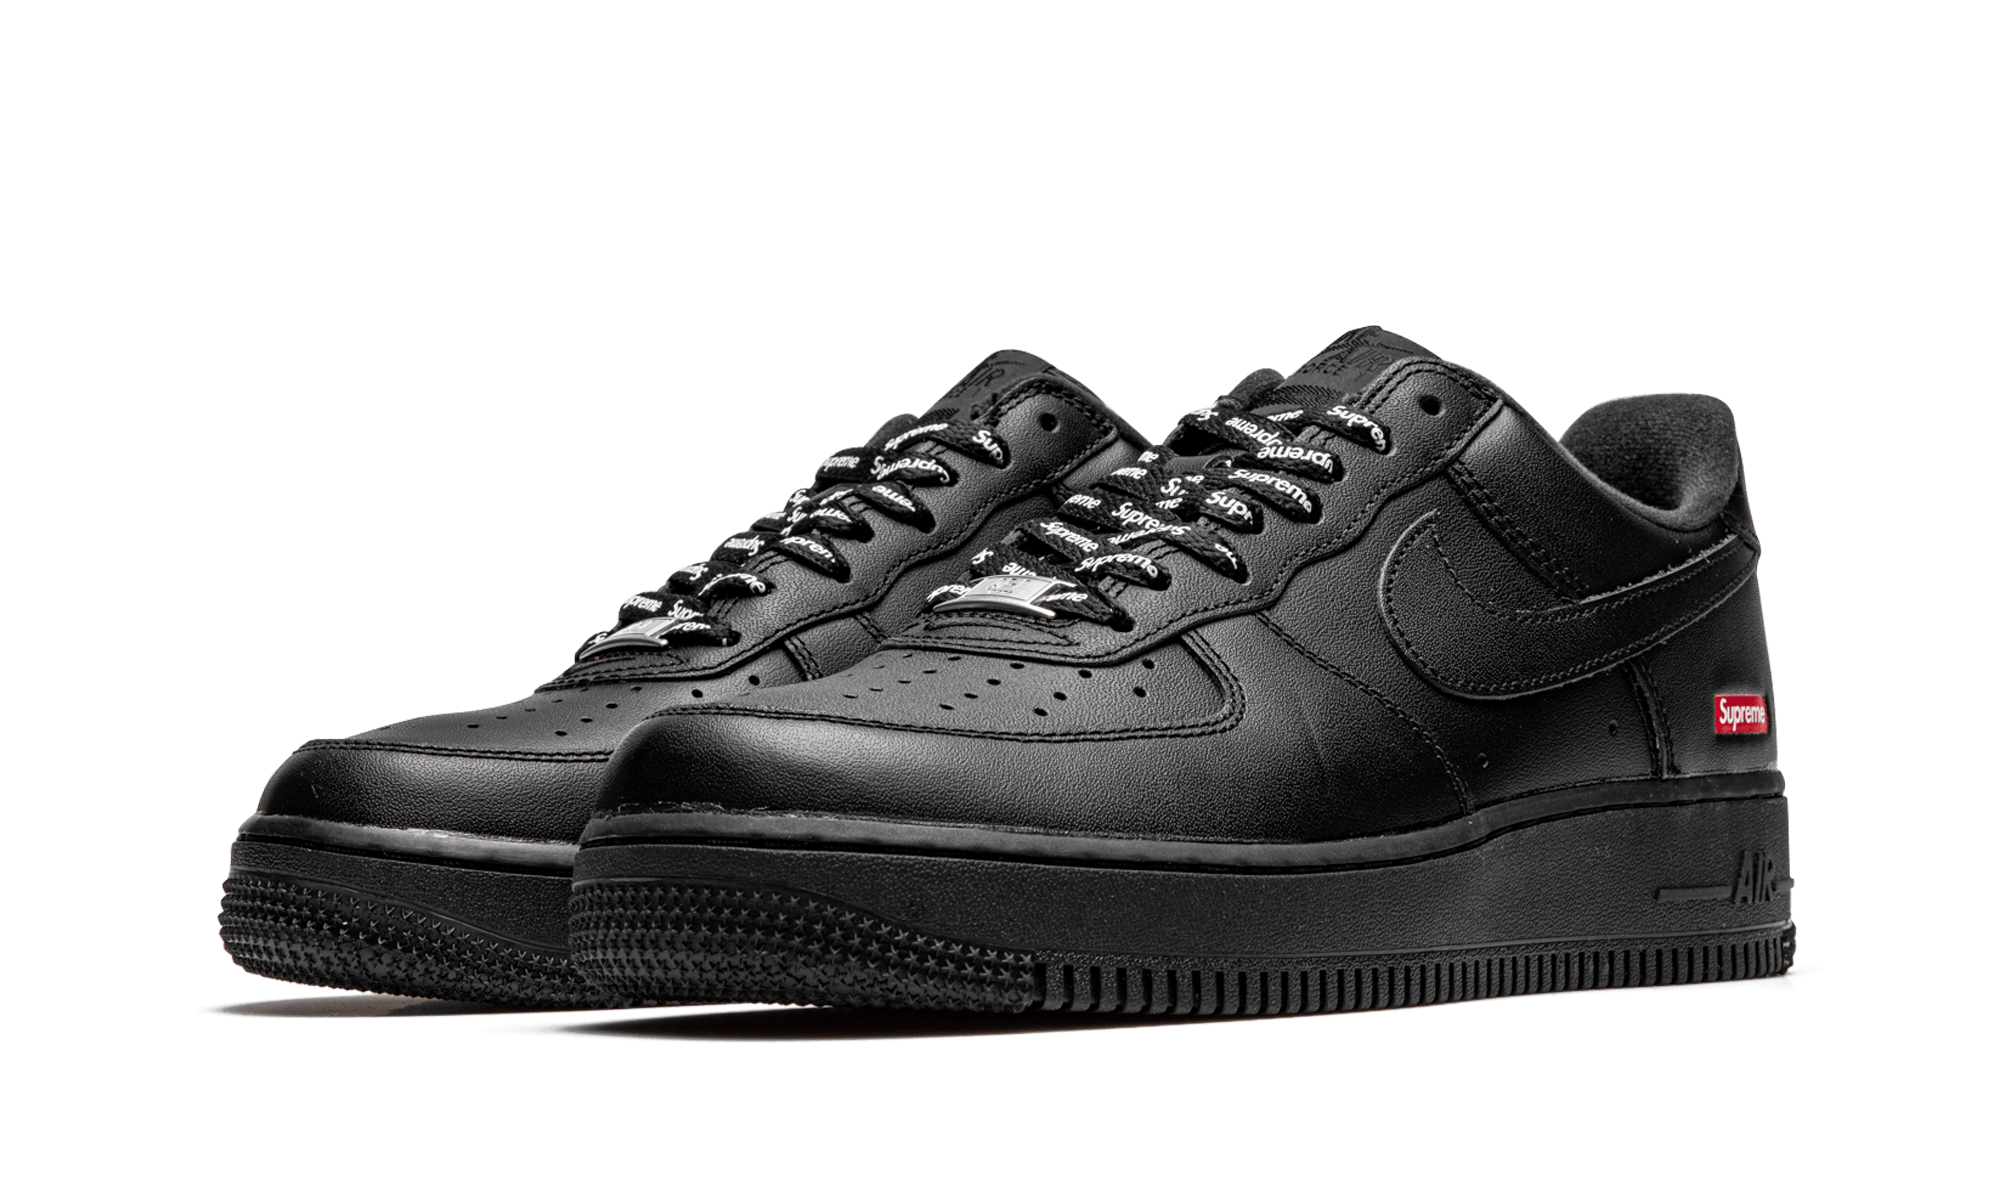 Air Force 1 Low Supreme Black – thesneakart